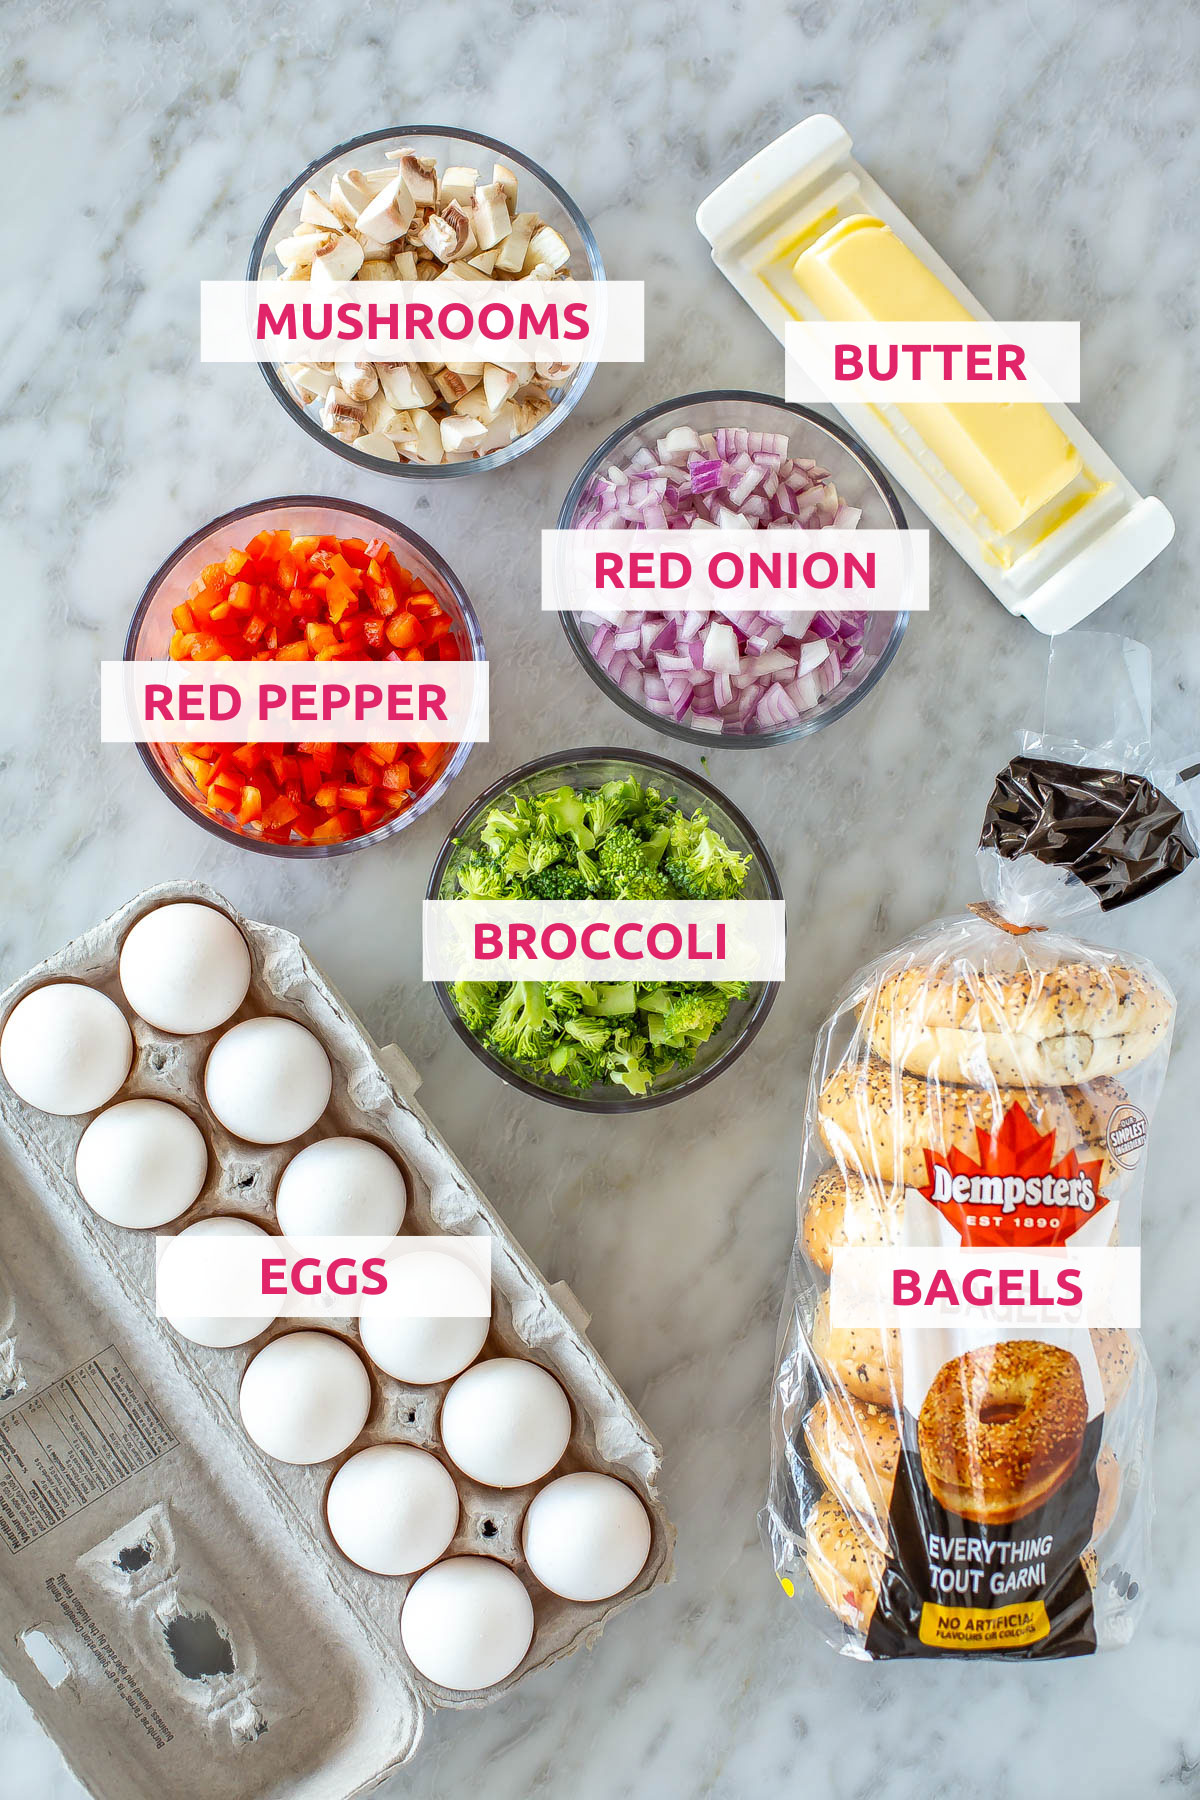 Ingredients for sheet pan eggs: Eggs, broccoli, red pepper, red onion, mushrooms, butter and bagels.